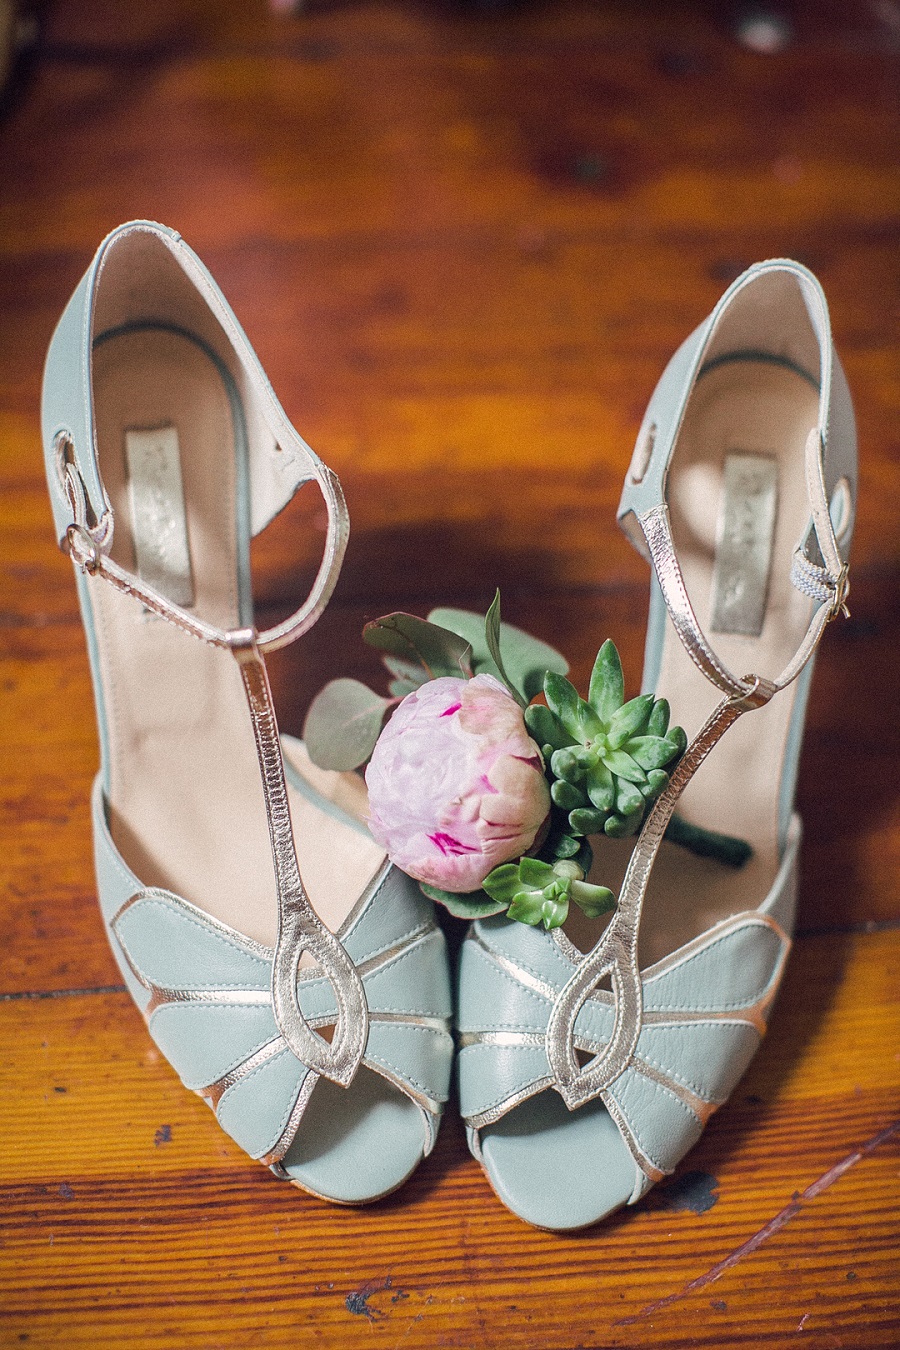 southern-style-victorian-inspired-wedding-shoes